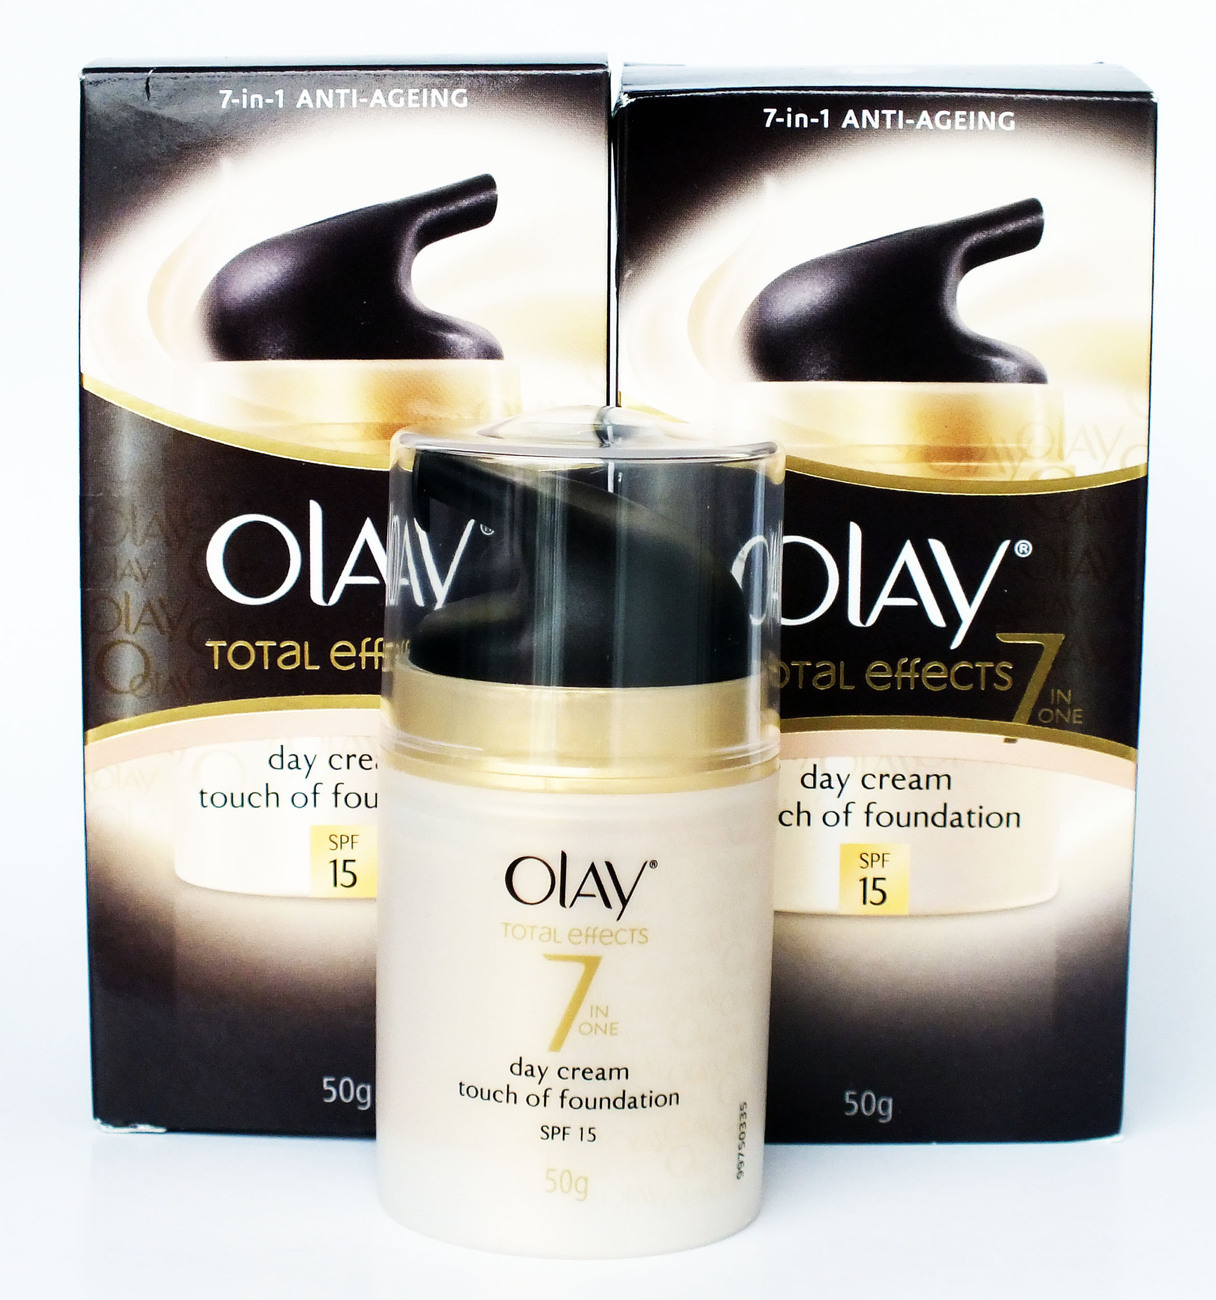 Olay BB CREAM UV SPF15 TOUCH of FOUNDATION 7-in-1 YOUTHFUL-LOOKING SKIN 50g - $19.99